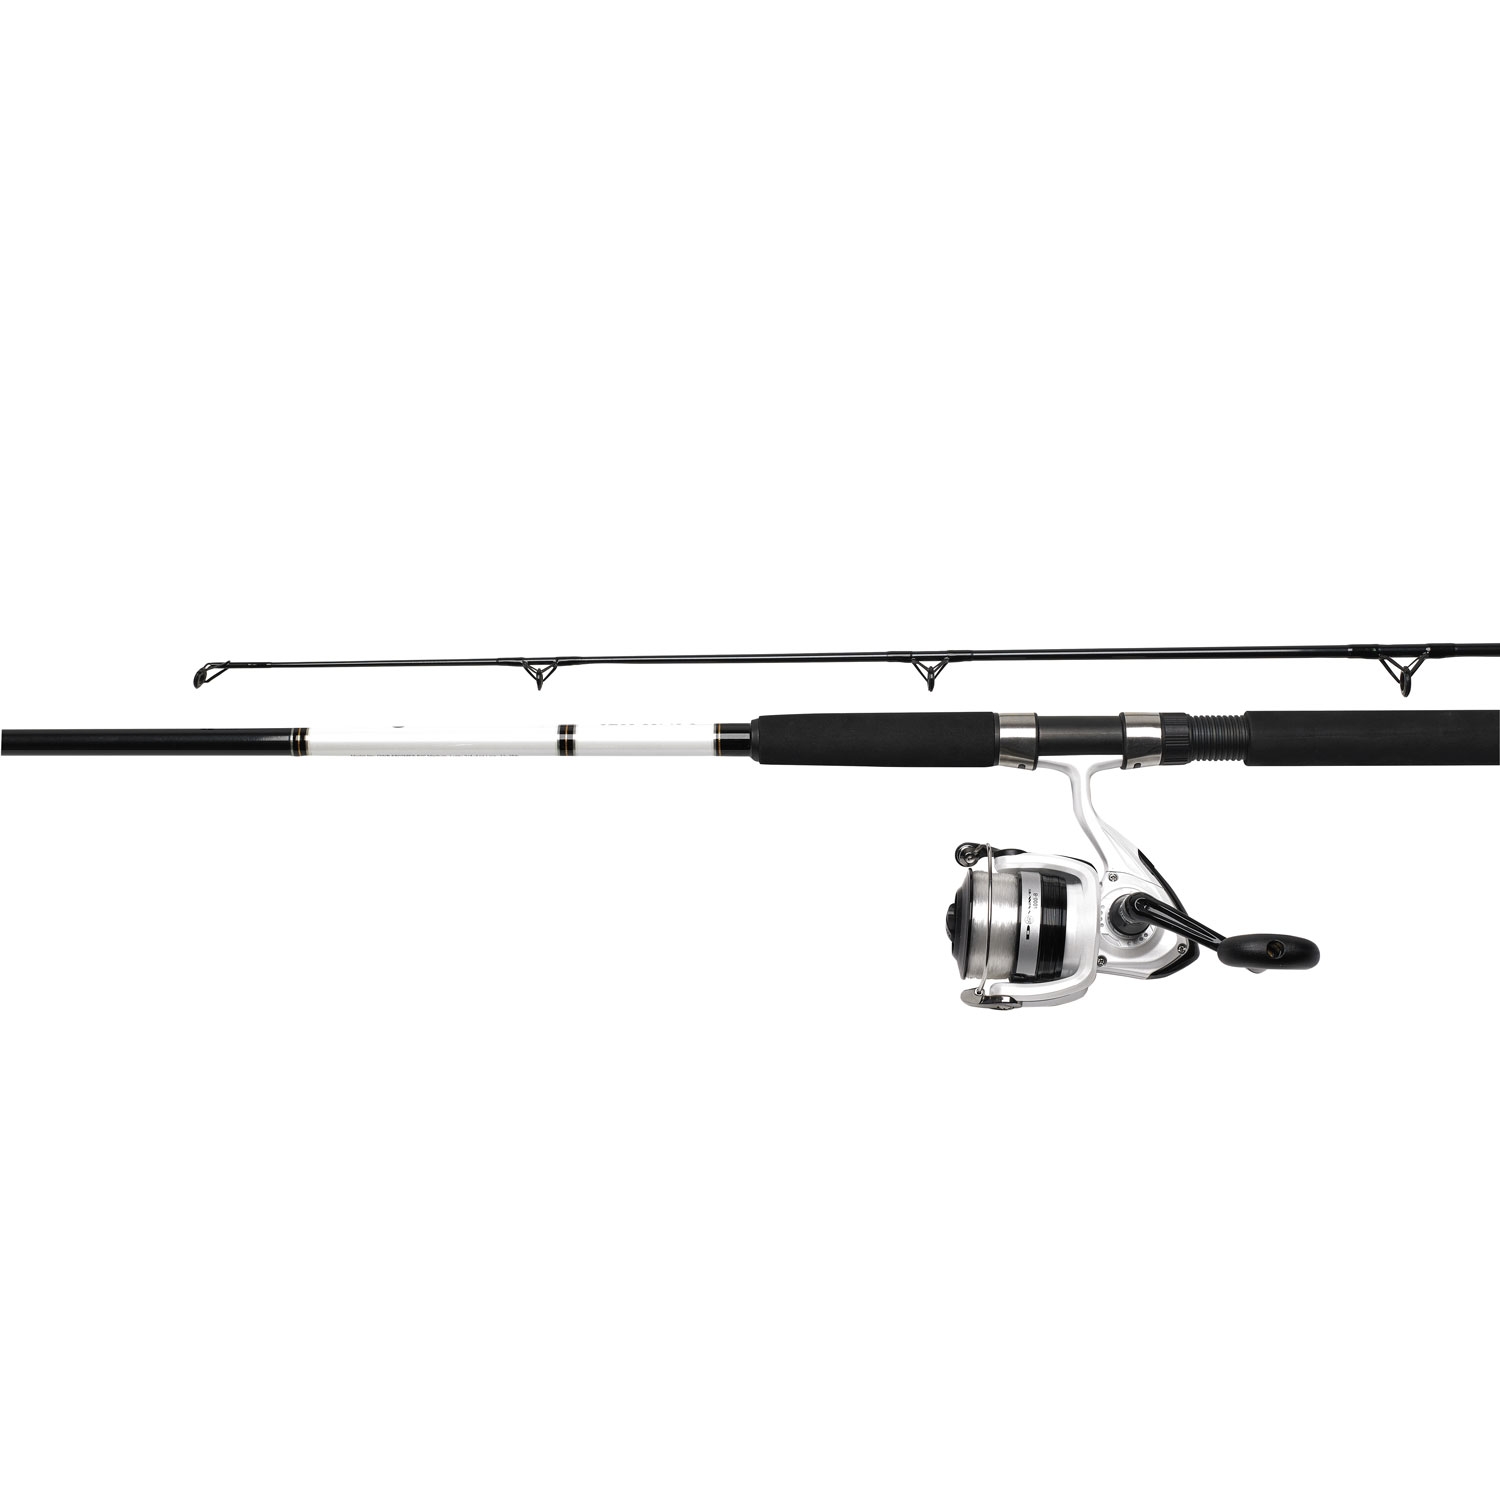 Daiwa D Wave Combos - Sea Spinning Rods Outfits Kits